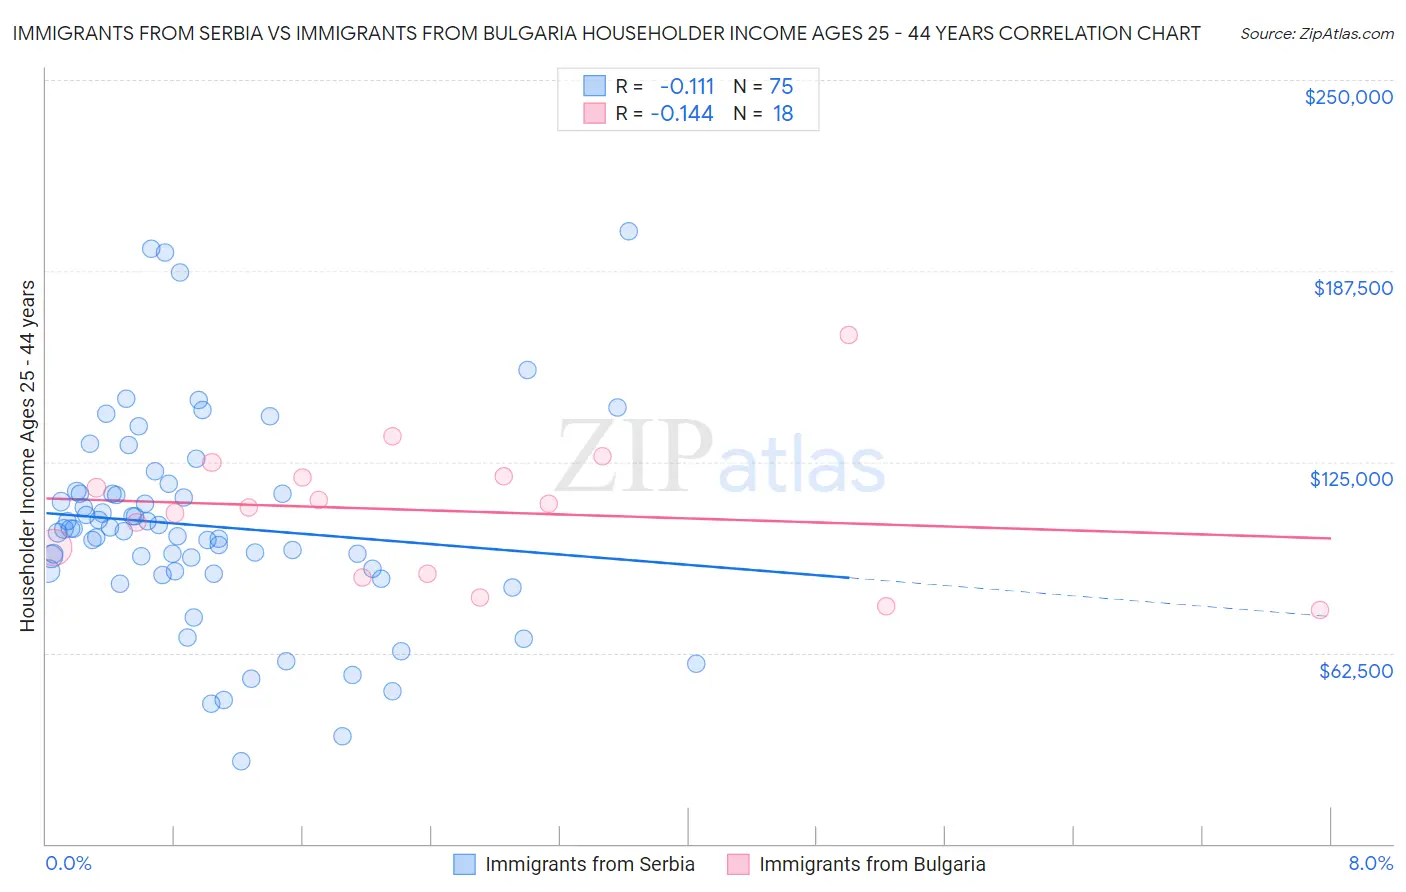 Immigrants from Serbia vs Immigrants from Bulgaria Householder Income Ages 25 - 44 years